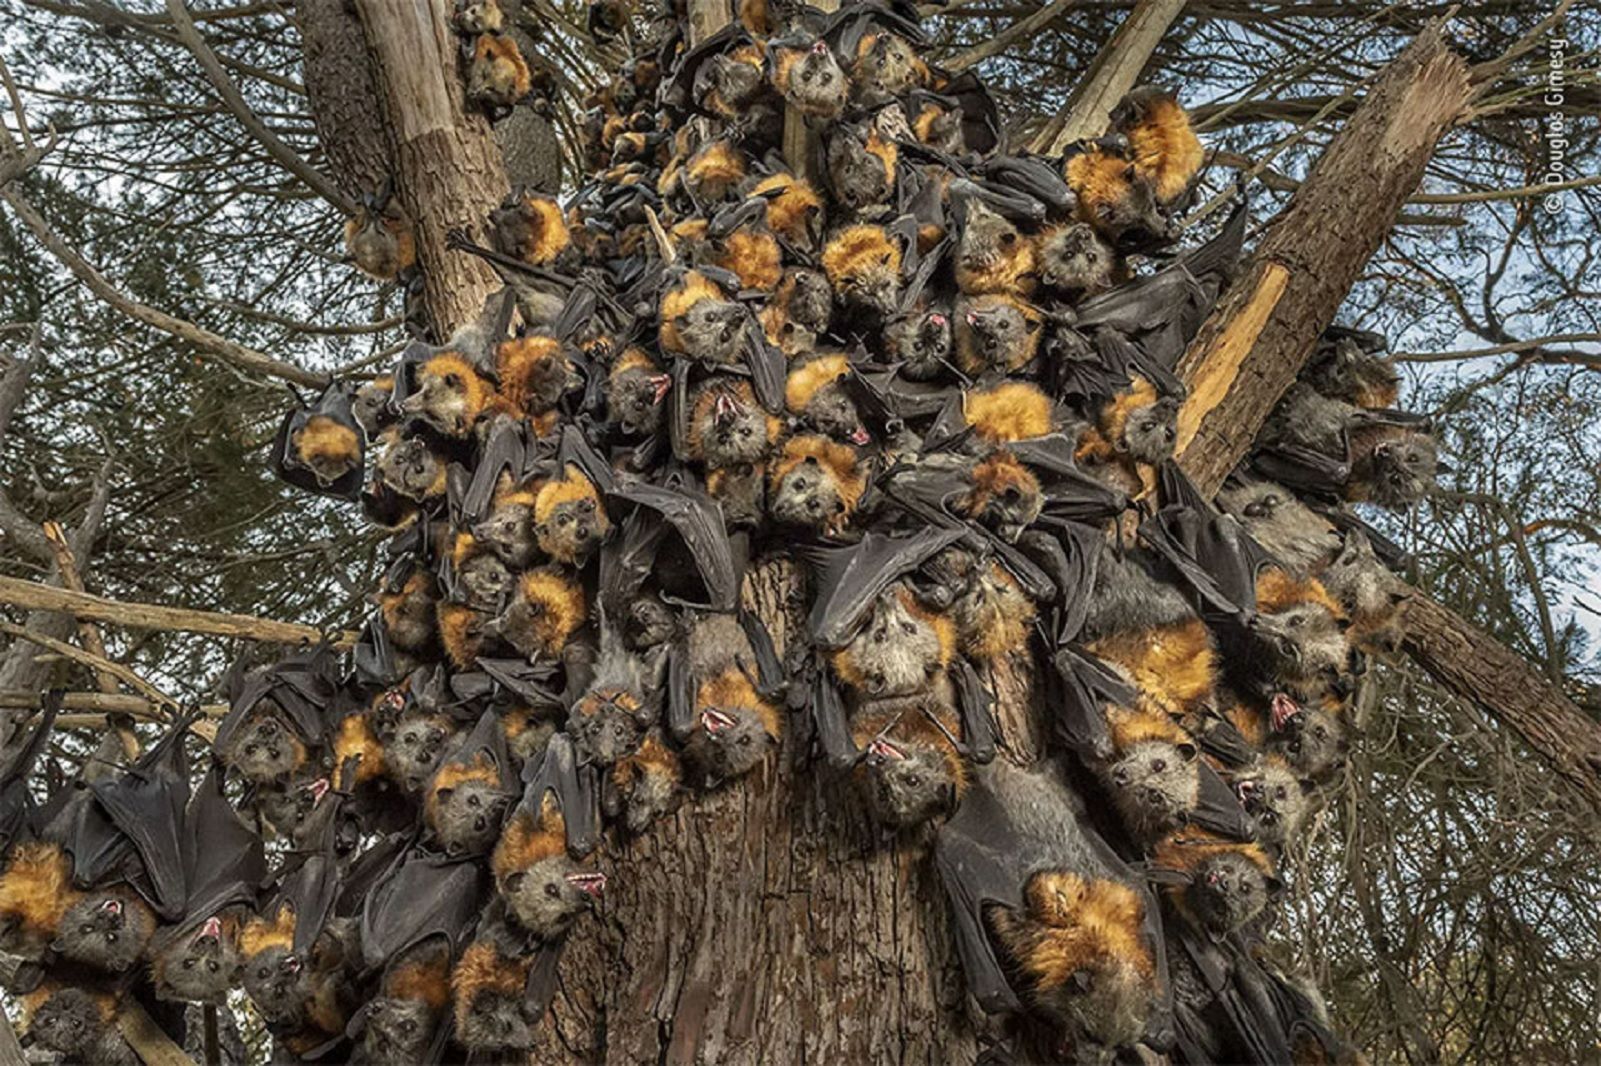 Incredible images from the Wildlife Photographer of the Year competition photo 31